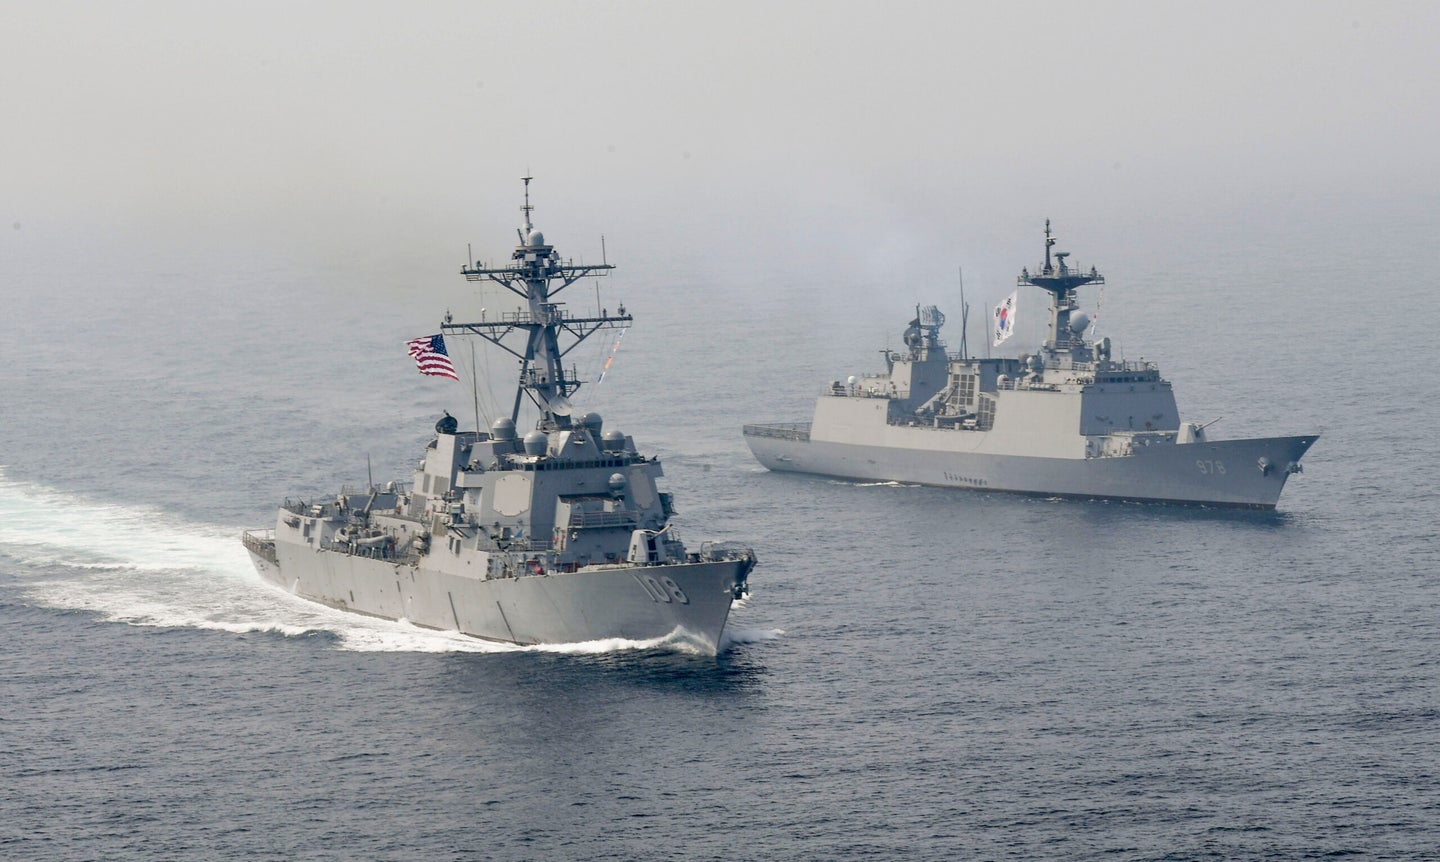 170425-N-RM689-100 U.S. 7TH FLEET AREA OF OPERATIONS (April 25, 2017) The Arleigh Burke-class guided-missile destroyer USS Wayne E. Meyer (DDG 108) is underway alongside the Republic of Korea multirole guided-missile destroyer Wang Geon (DDG 978) during a bilateral exercise. Wayne E. Meyer is on a scheduled western Pacific deployment with the Carl Vinson Carrier Strike Group. U.S. Navy aircraft carrier strike groups have patrolled the Indo-Asia-Pacific regularly and routinely for more than 70 years. (U.S. Navy photo by Mass Communication Specialist 3rd Class Kelsey L. Adams/Released)